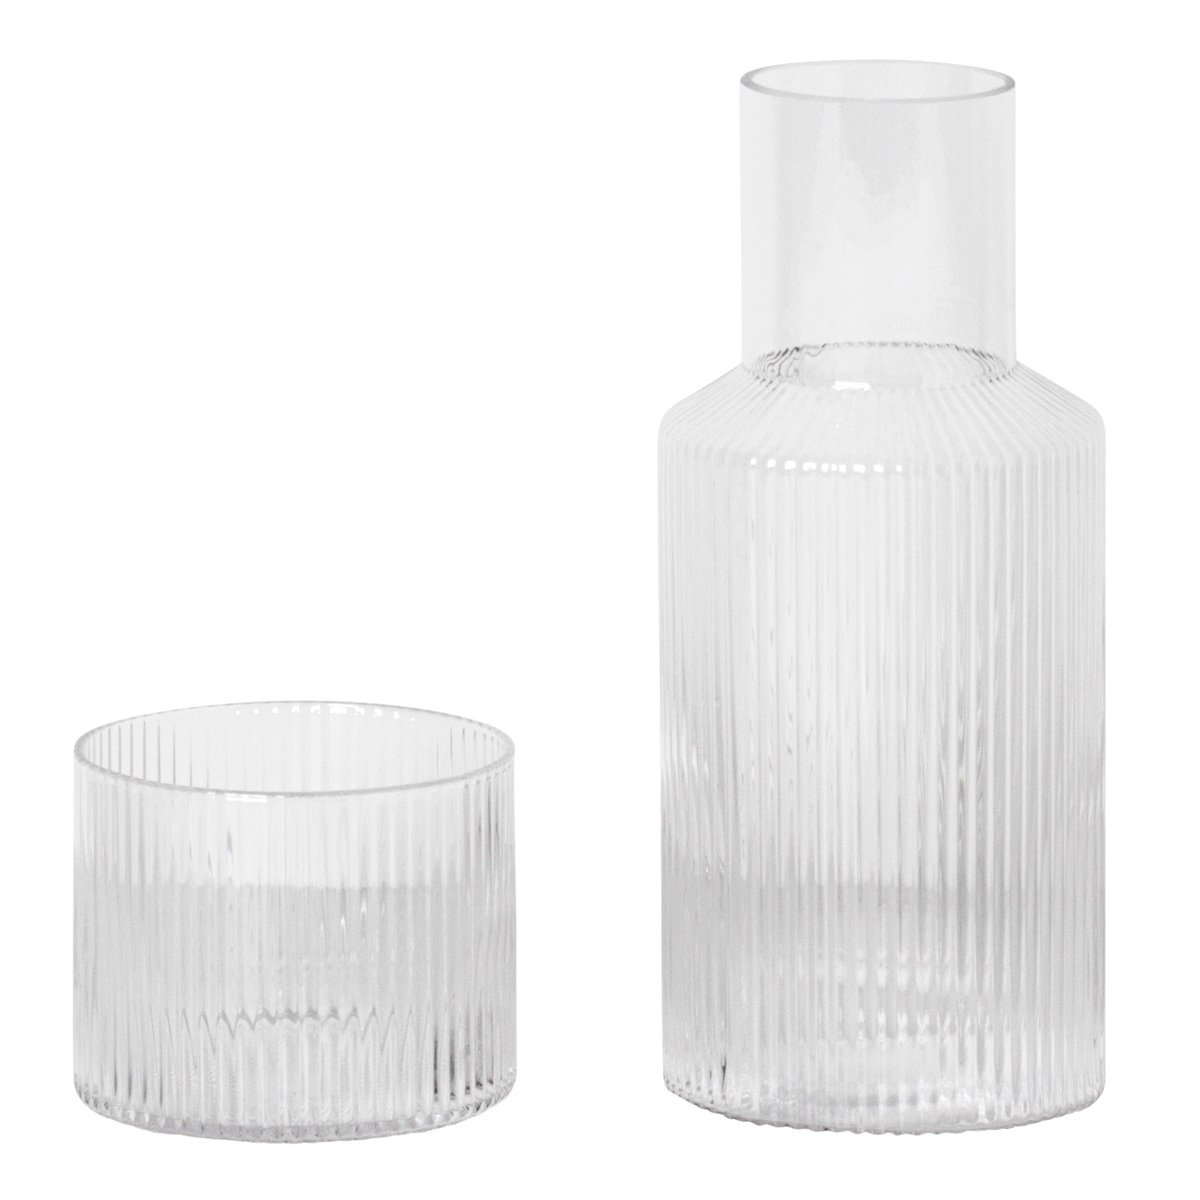 Beautiful carafes and jugs to transform your table covering